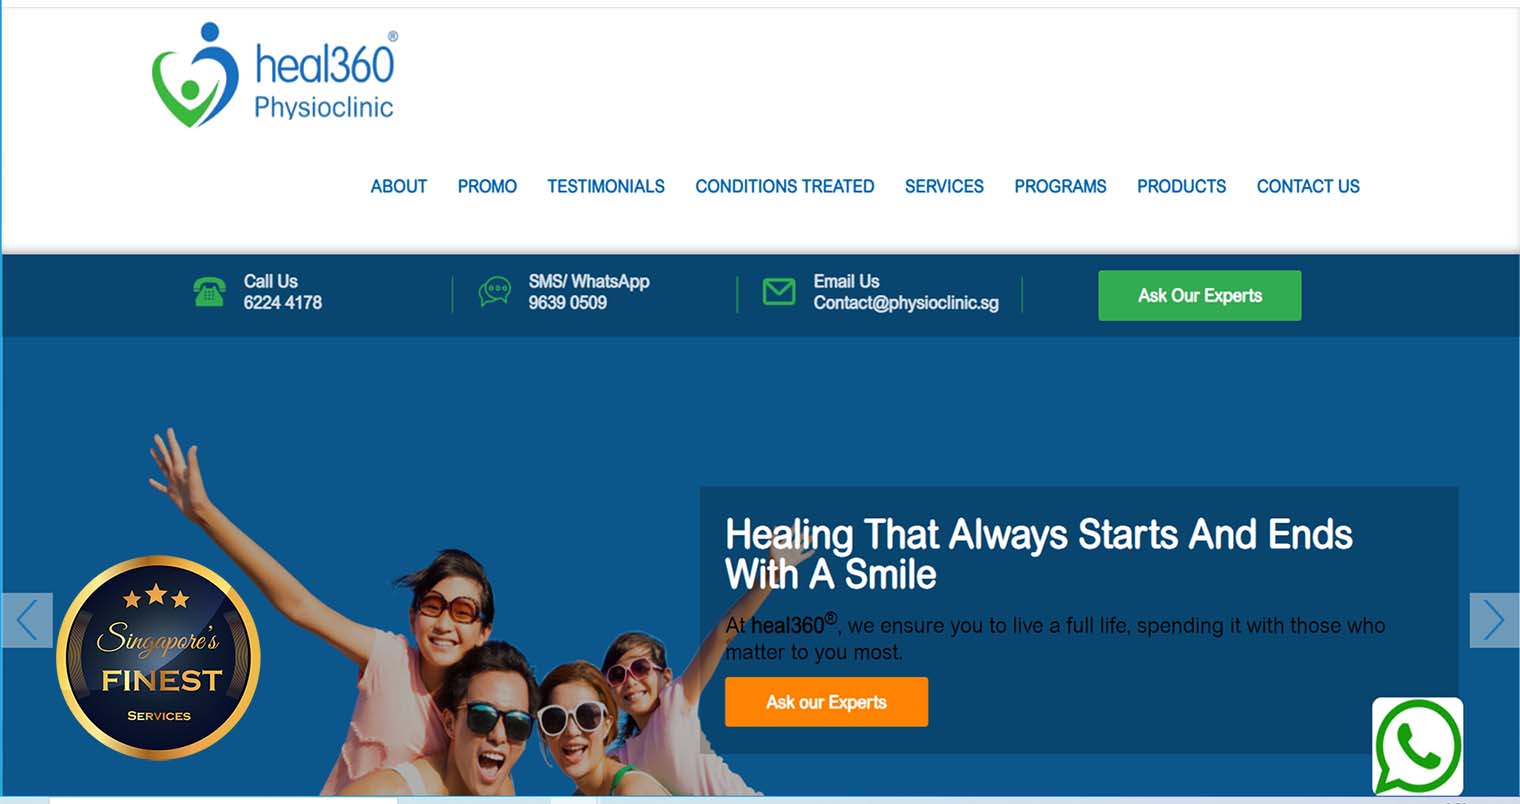 Heal 360 Physioclinic - Physiotherapy Clinics Singapore